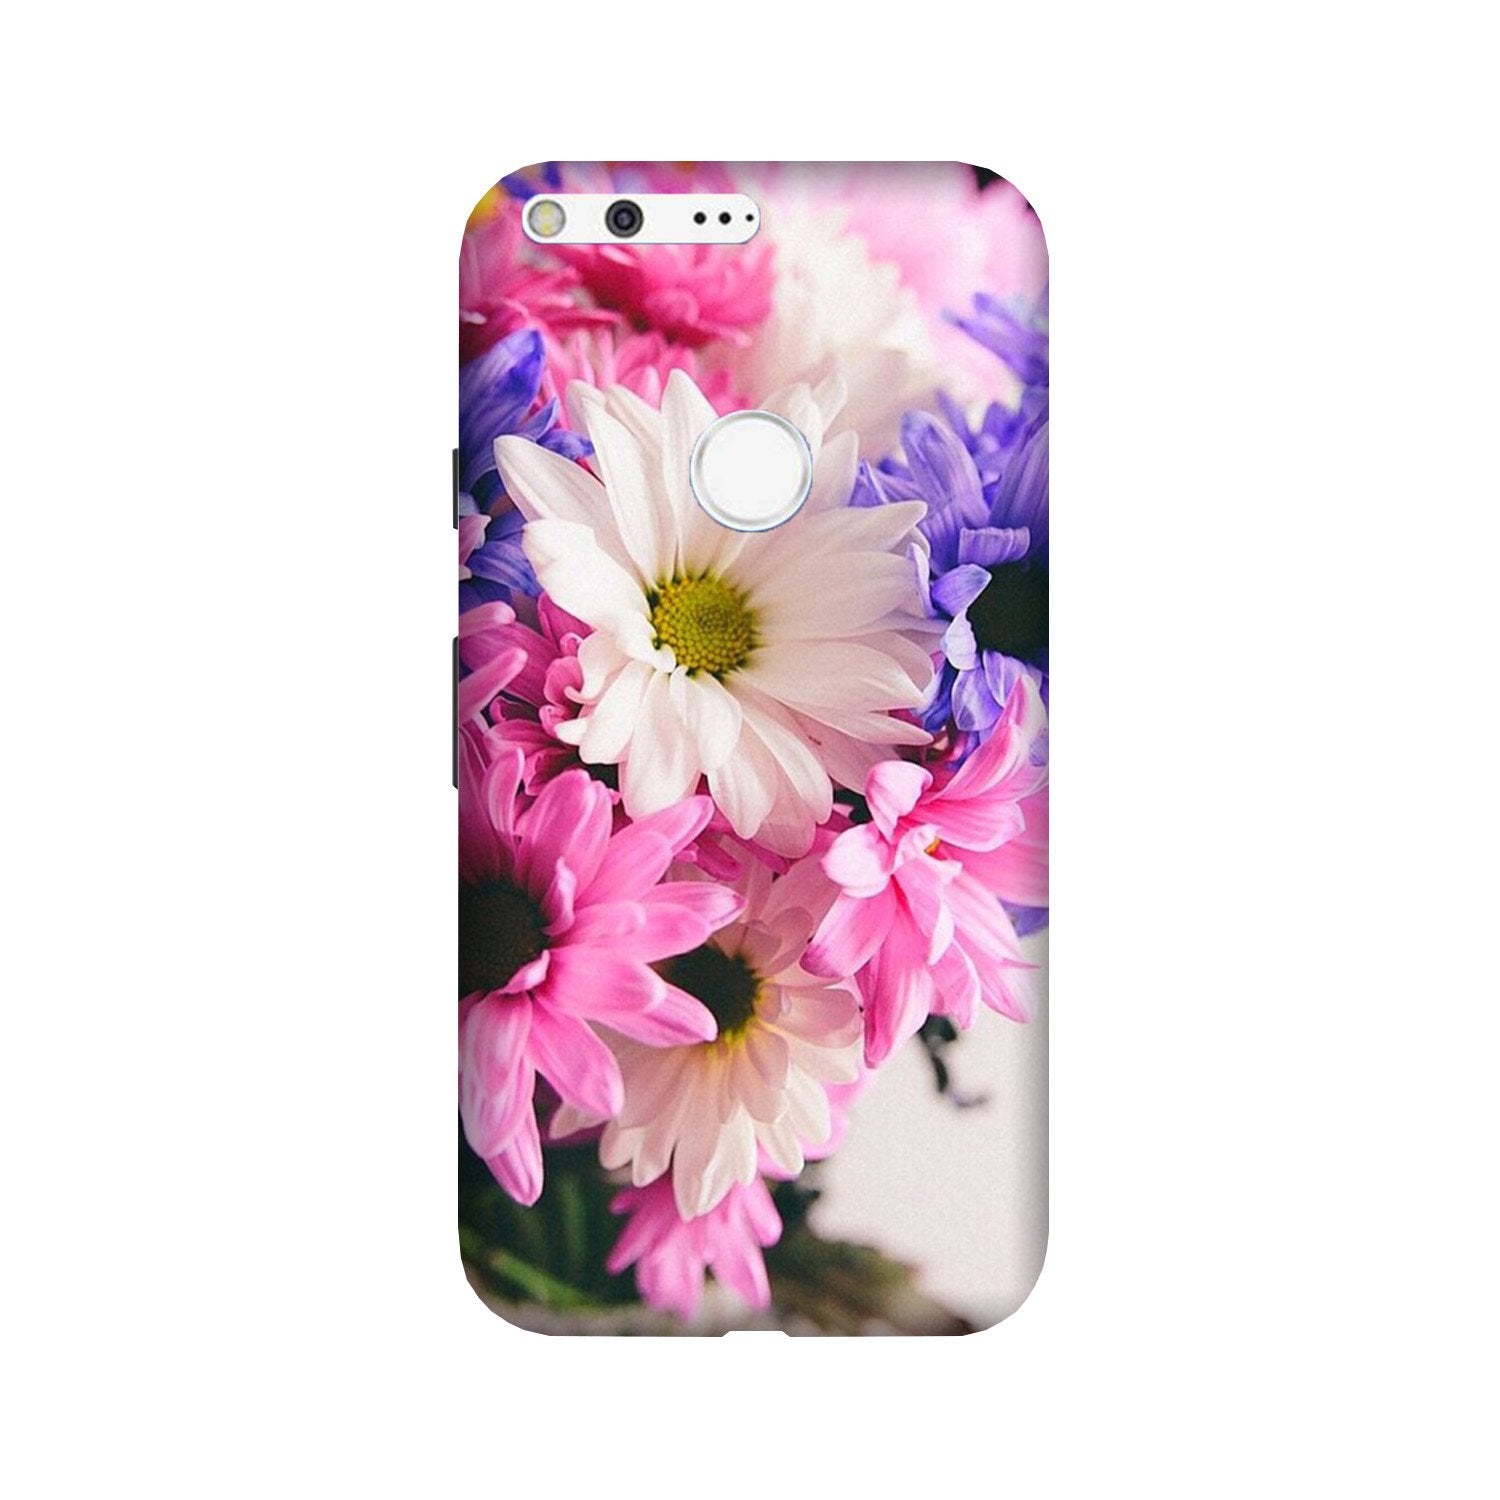 Coloful Daisy Case for Google Pixel